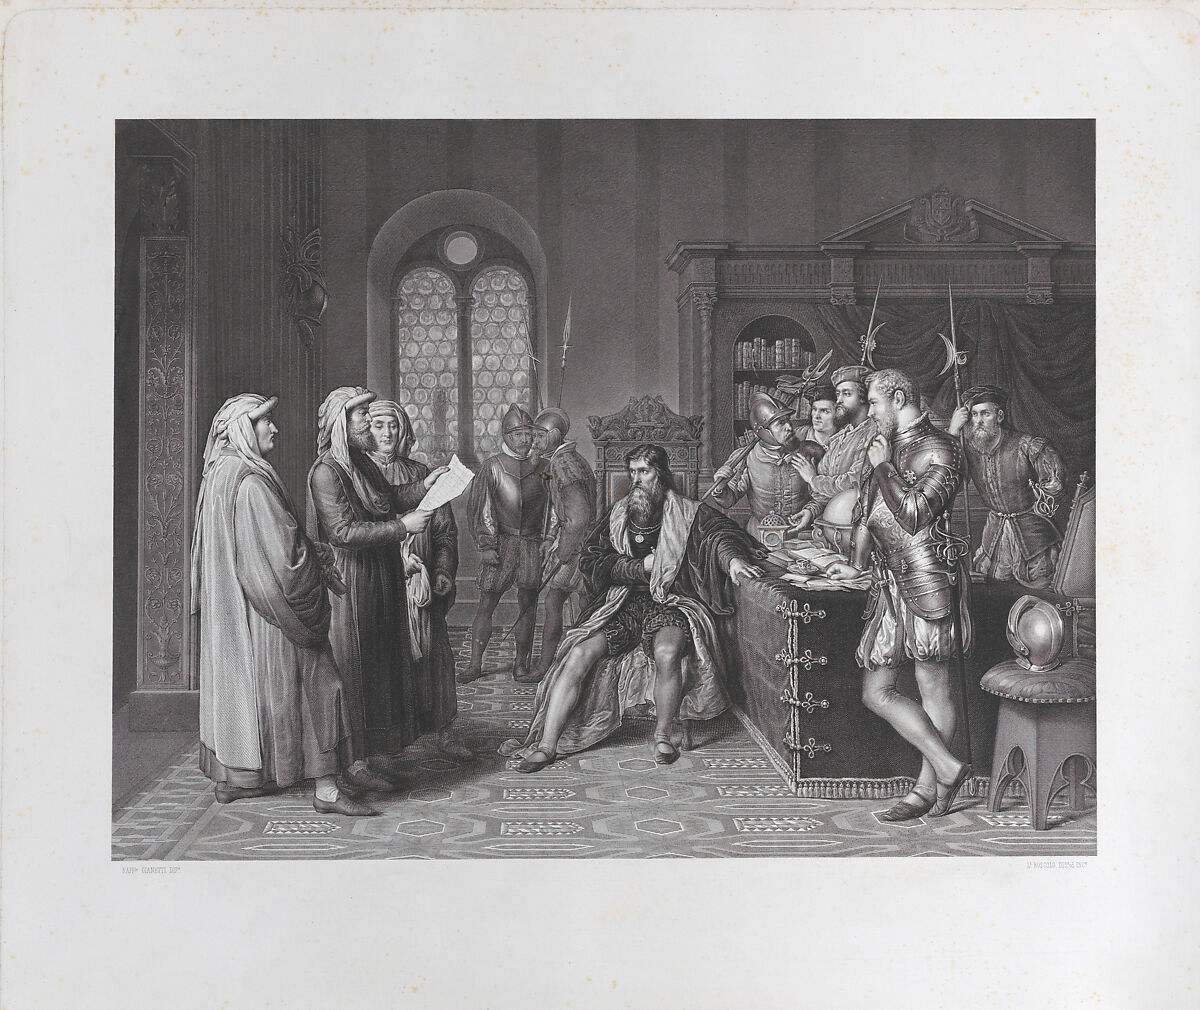 Scene with Columbus (?) at center, soldiers at right, and men in robes at left, Luigi Boscolo (Italian, born Rovigo, 1824), Engraving 